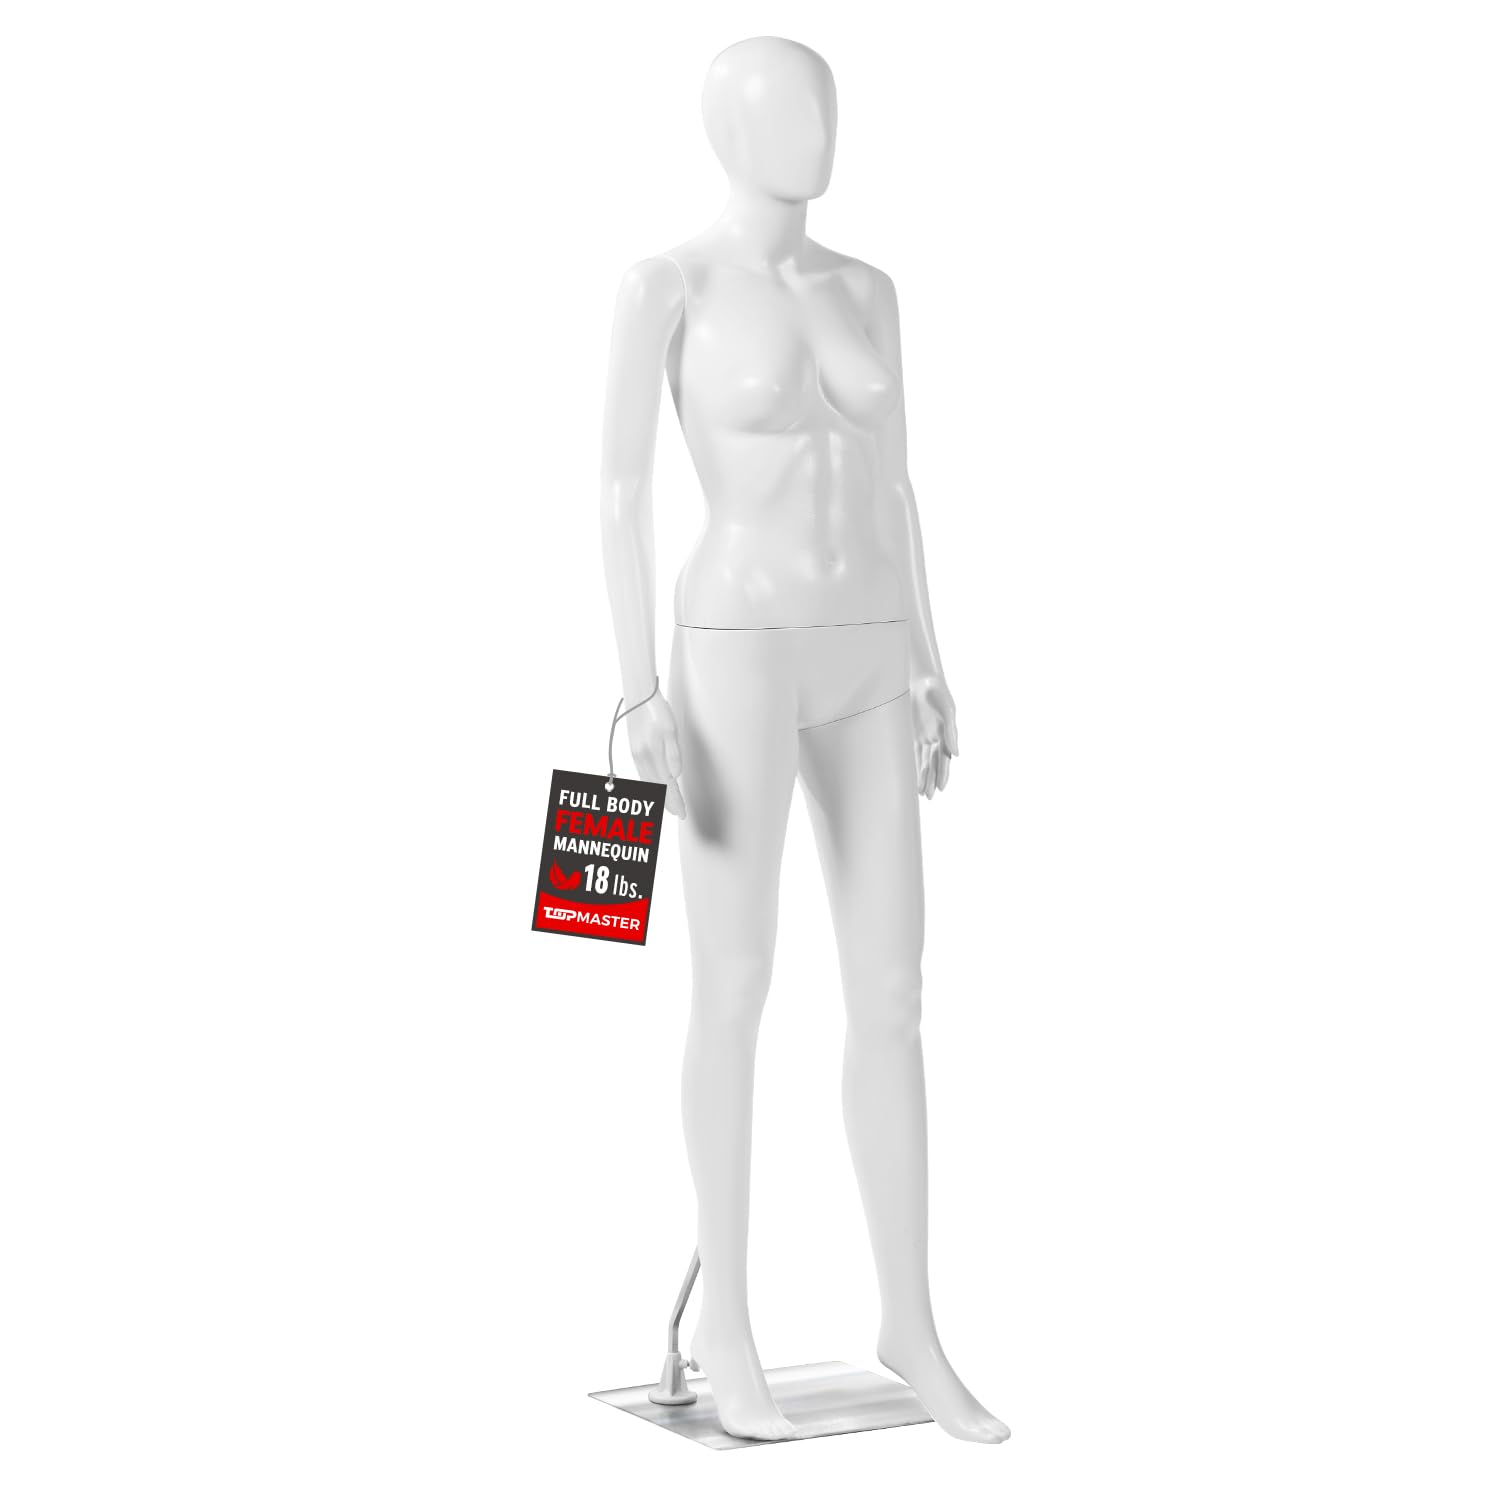 360° Flex Mannequin PP Dress Form with Vivid Expressions & Adjustable Posture - Easy Assembly, Durable Metal Base, Fits All Garments - No Tool Required, Turnable Head & Flexible Limbs